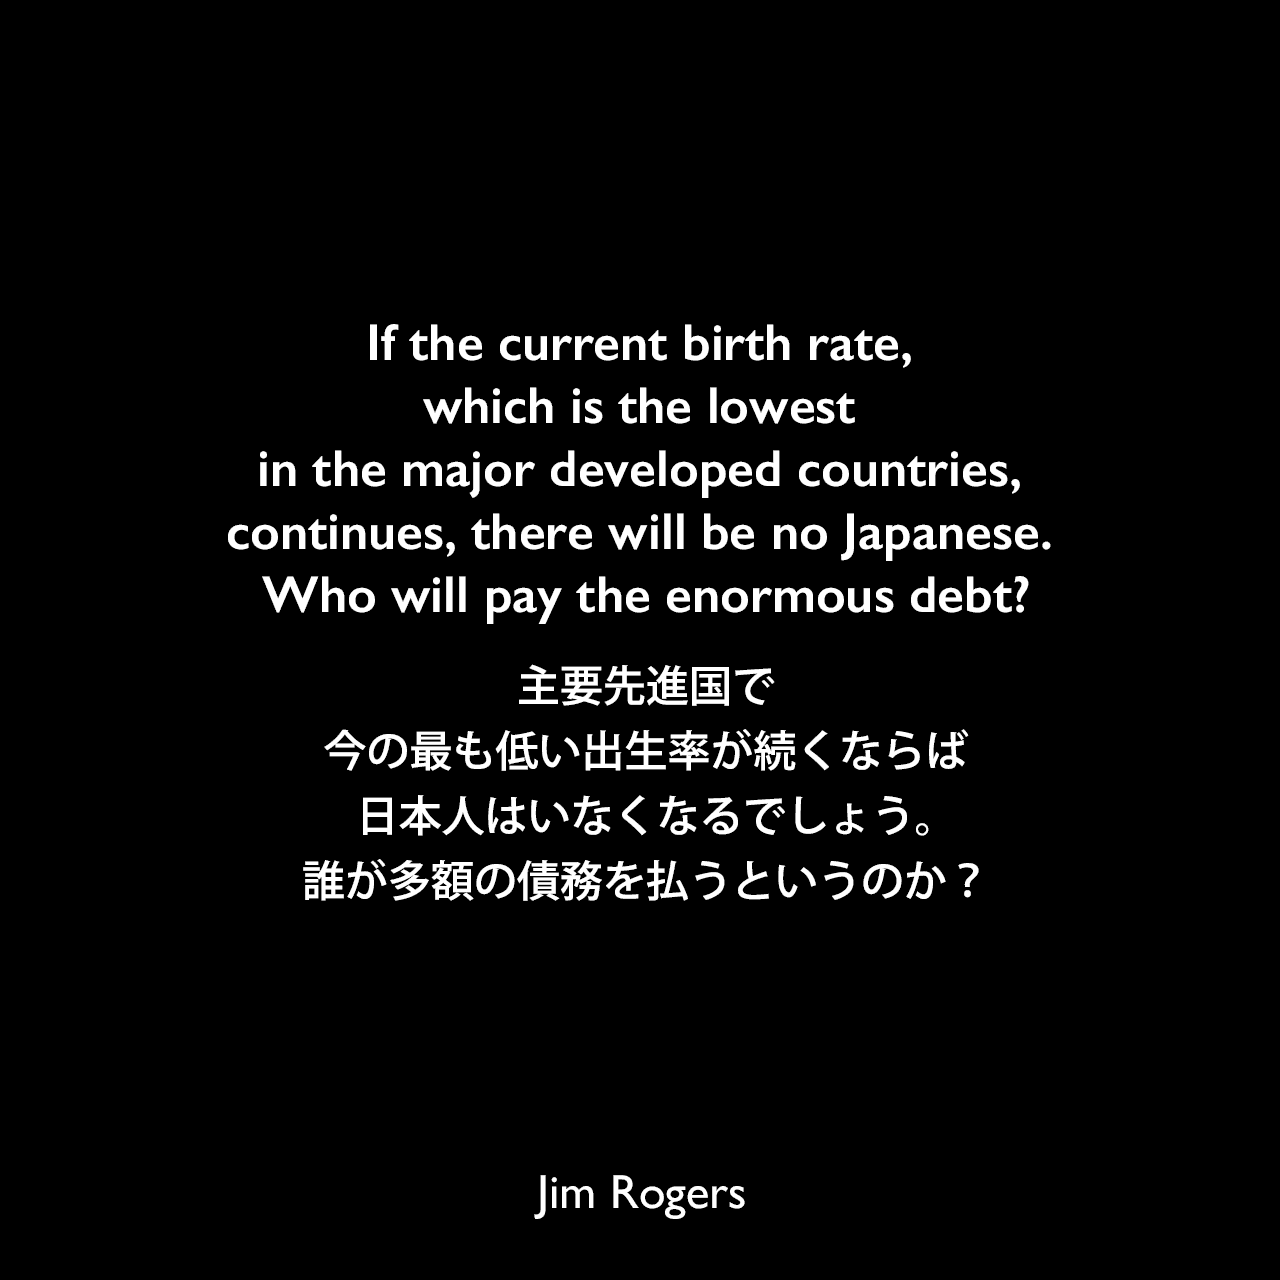 If the current birth rate, which is the lowest in the major developed countries, continues, there will be no Japanese. Who will pay the enormous debt?主要先進国で今の最も低い出生率が続くならば、日本人はいなくなるでしょう。誰が多額の債務を払うというのか？Jim Rogers